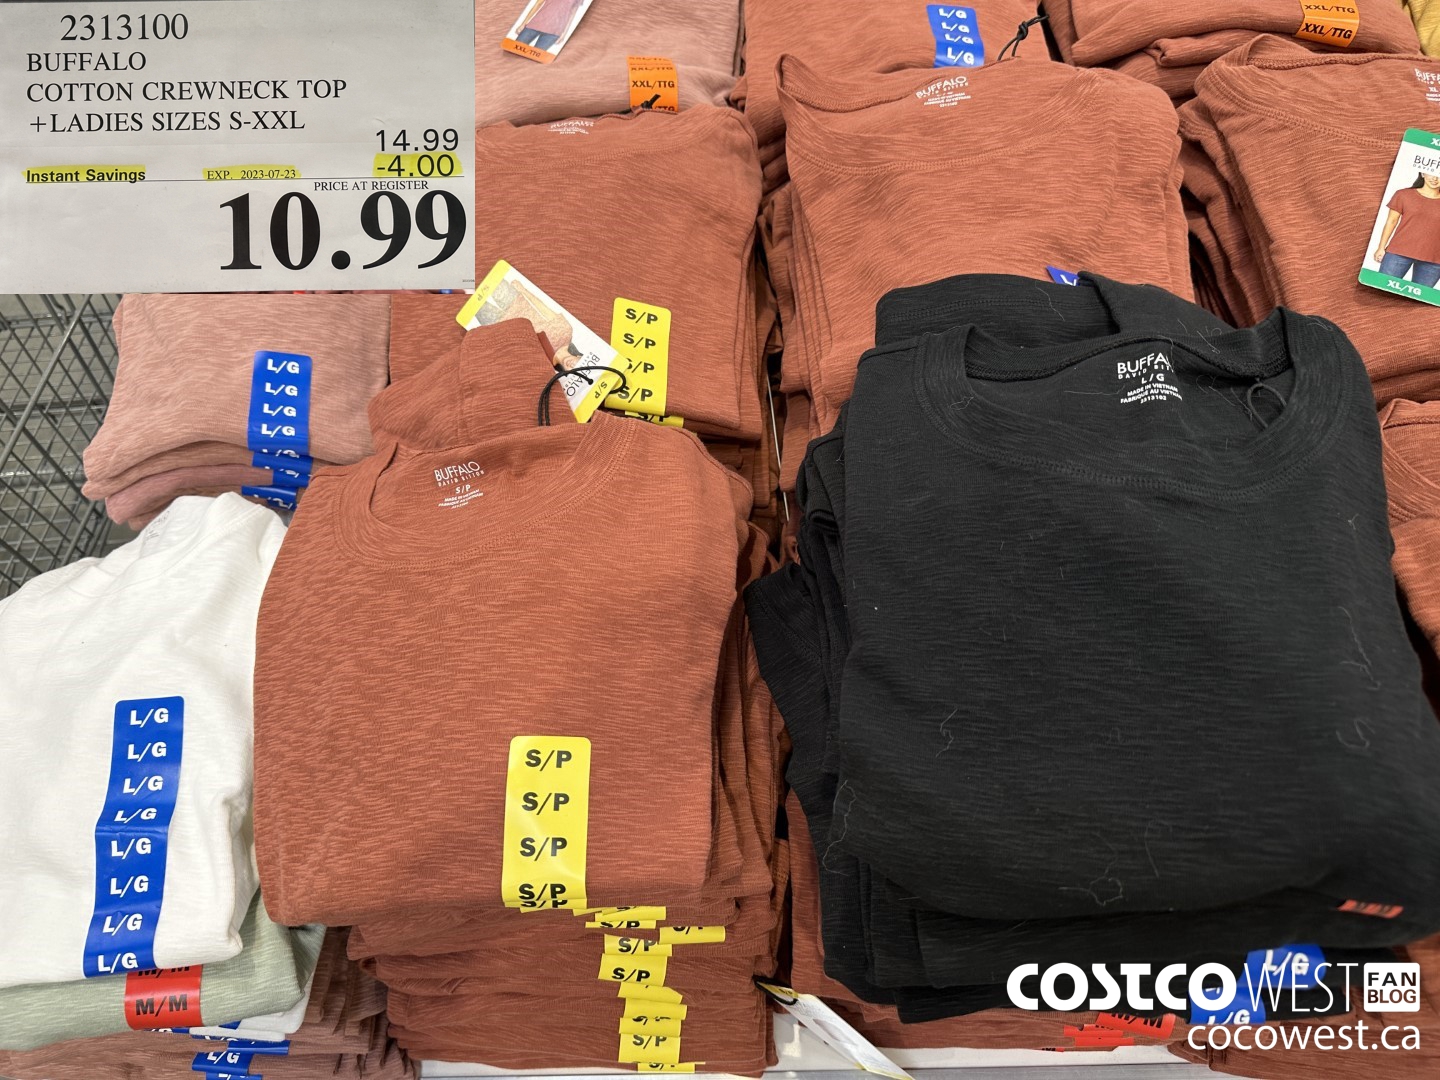 I spotted these 💯% cotton #LuckyBrand t-shirts at my local Costco 🇨🇦  today, $12.99 for one tee. The fabric was really soft! �